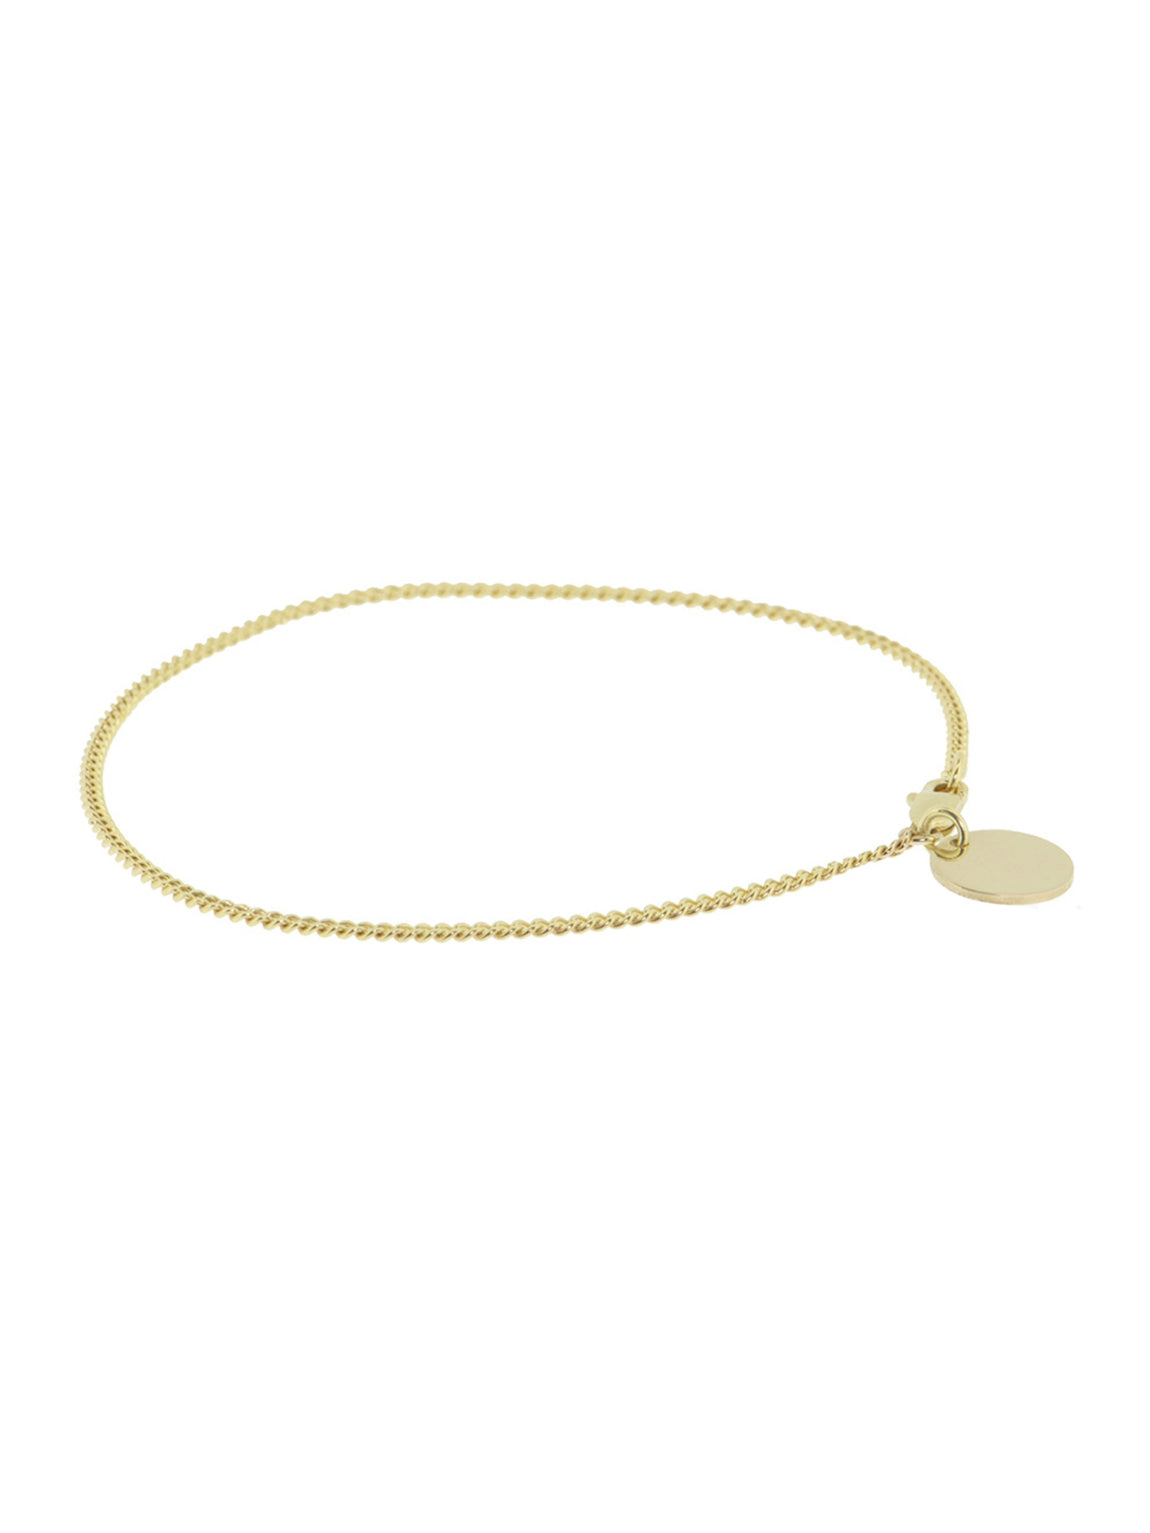 Louie | 14K Solid Gold